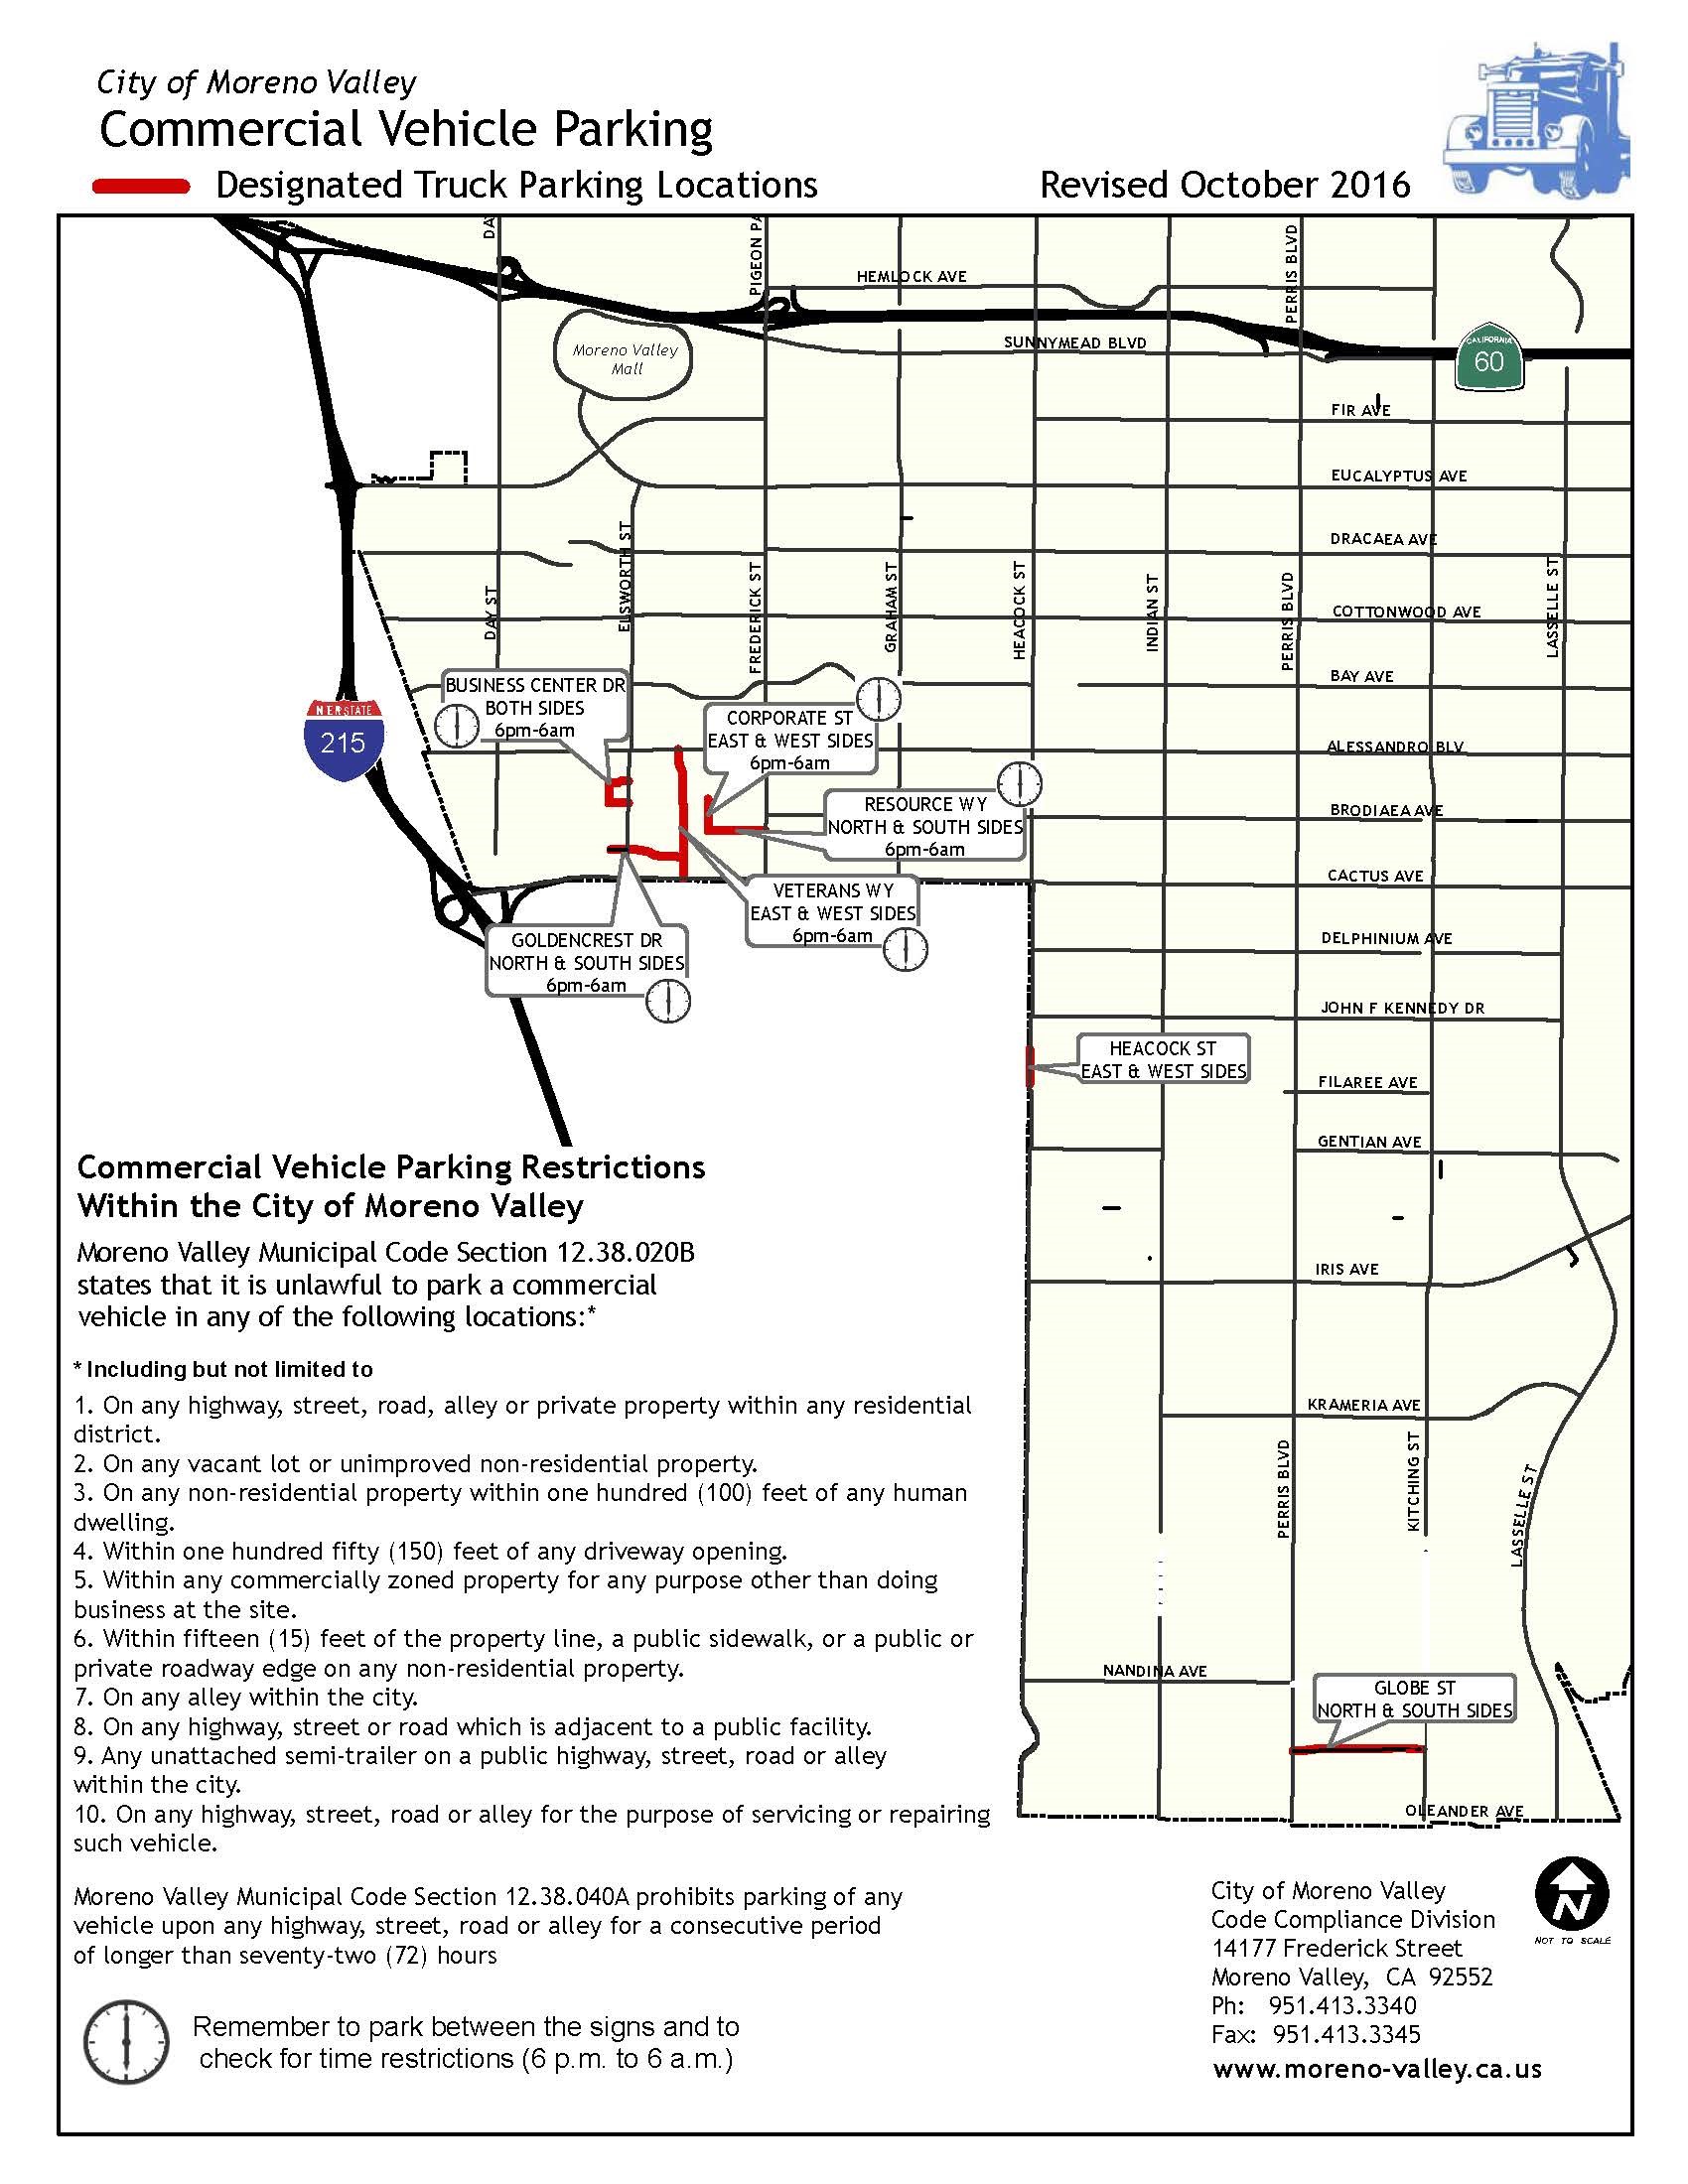 Map of Moreno Valley, CA marked to show designated truck parking locations. Also included in the image is a list of Moreno Valley's Commercial Vehicle Parking Restrictions.